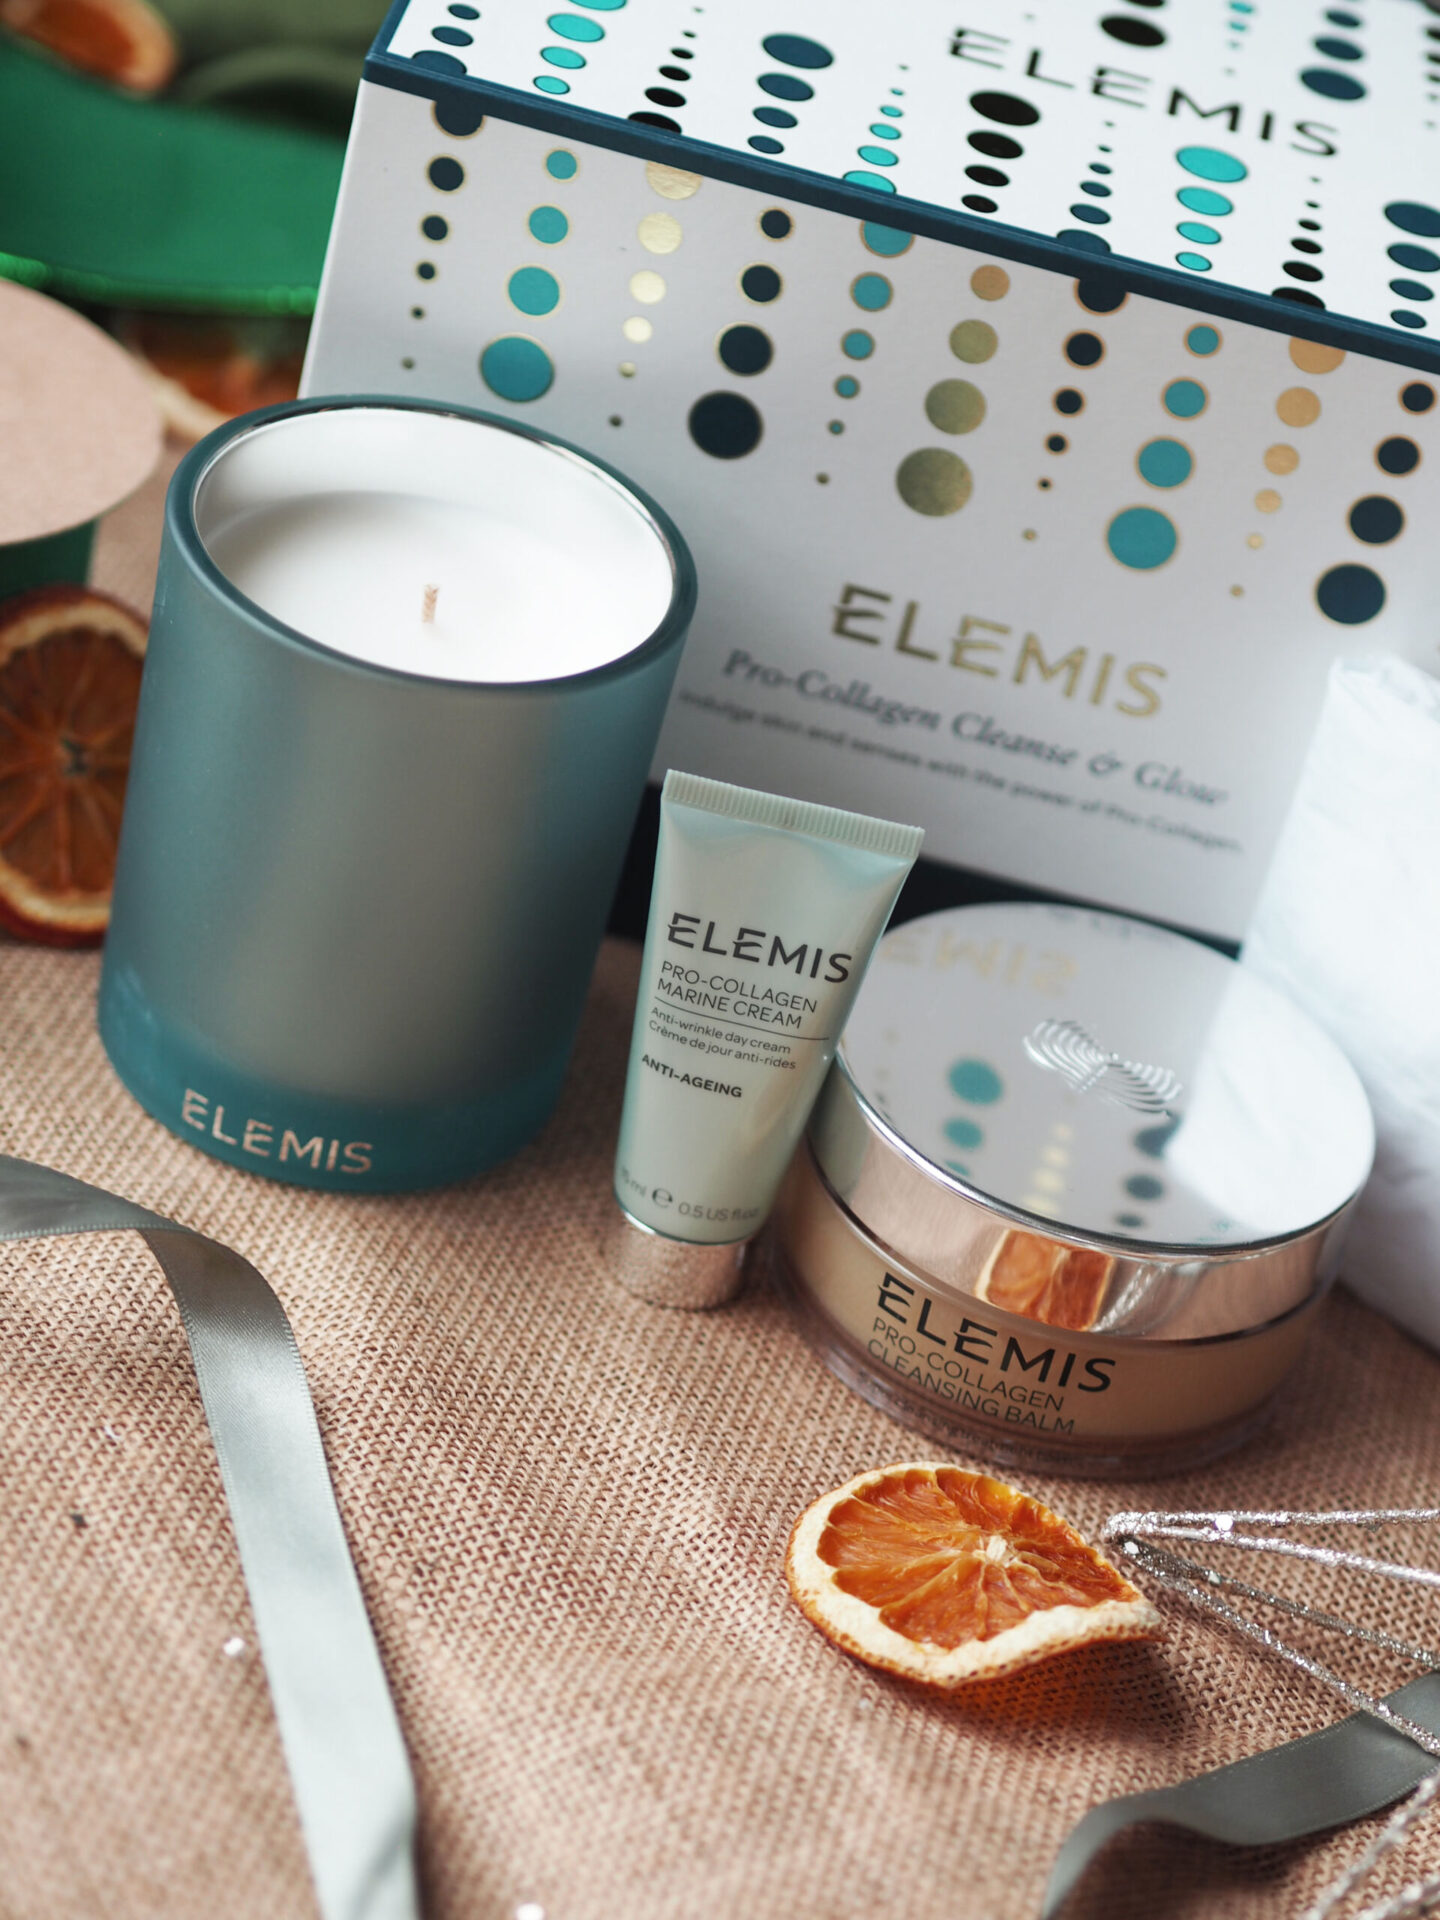 Elemis Pro Collagen Cleanse and Glow Christmas 2020